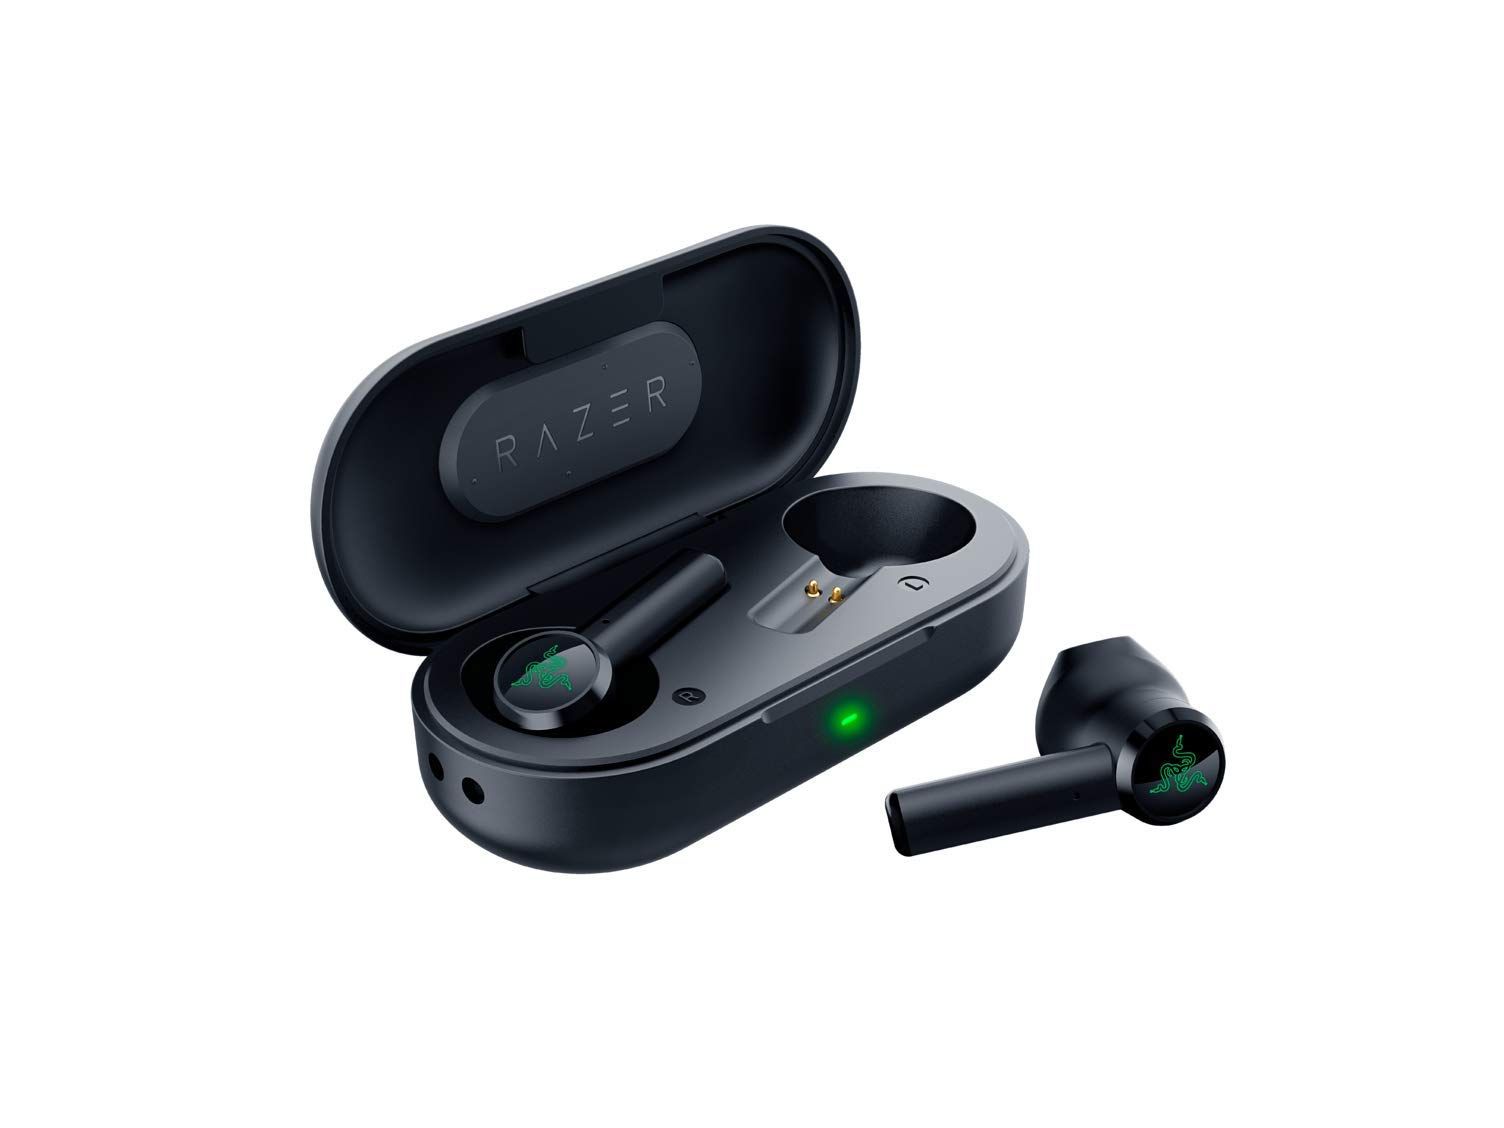 A picture of wireless earbuds for gamers, produced by Razer